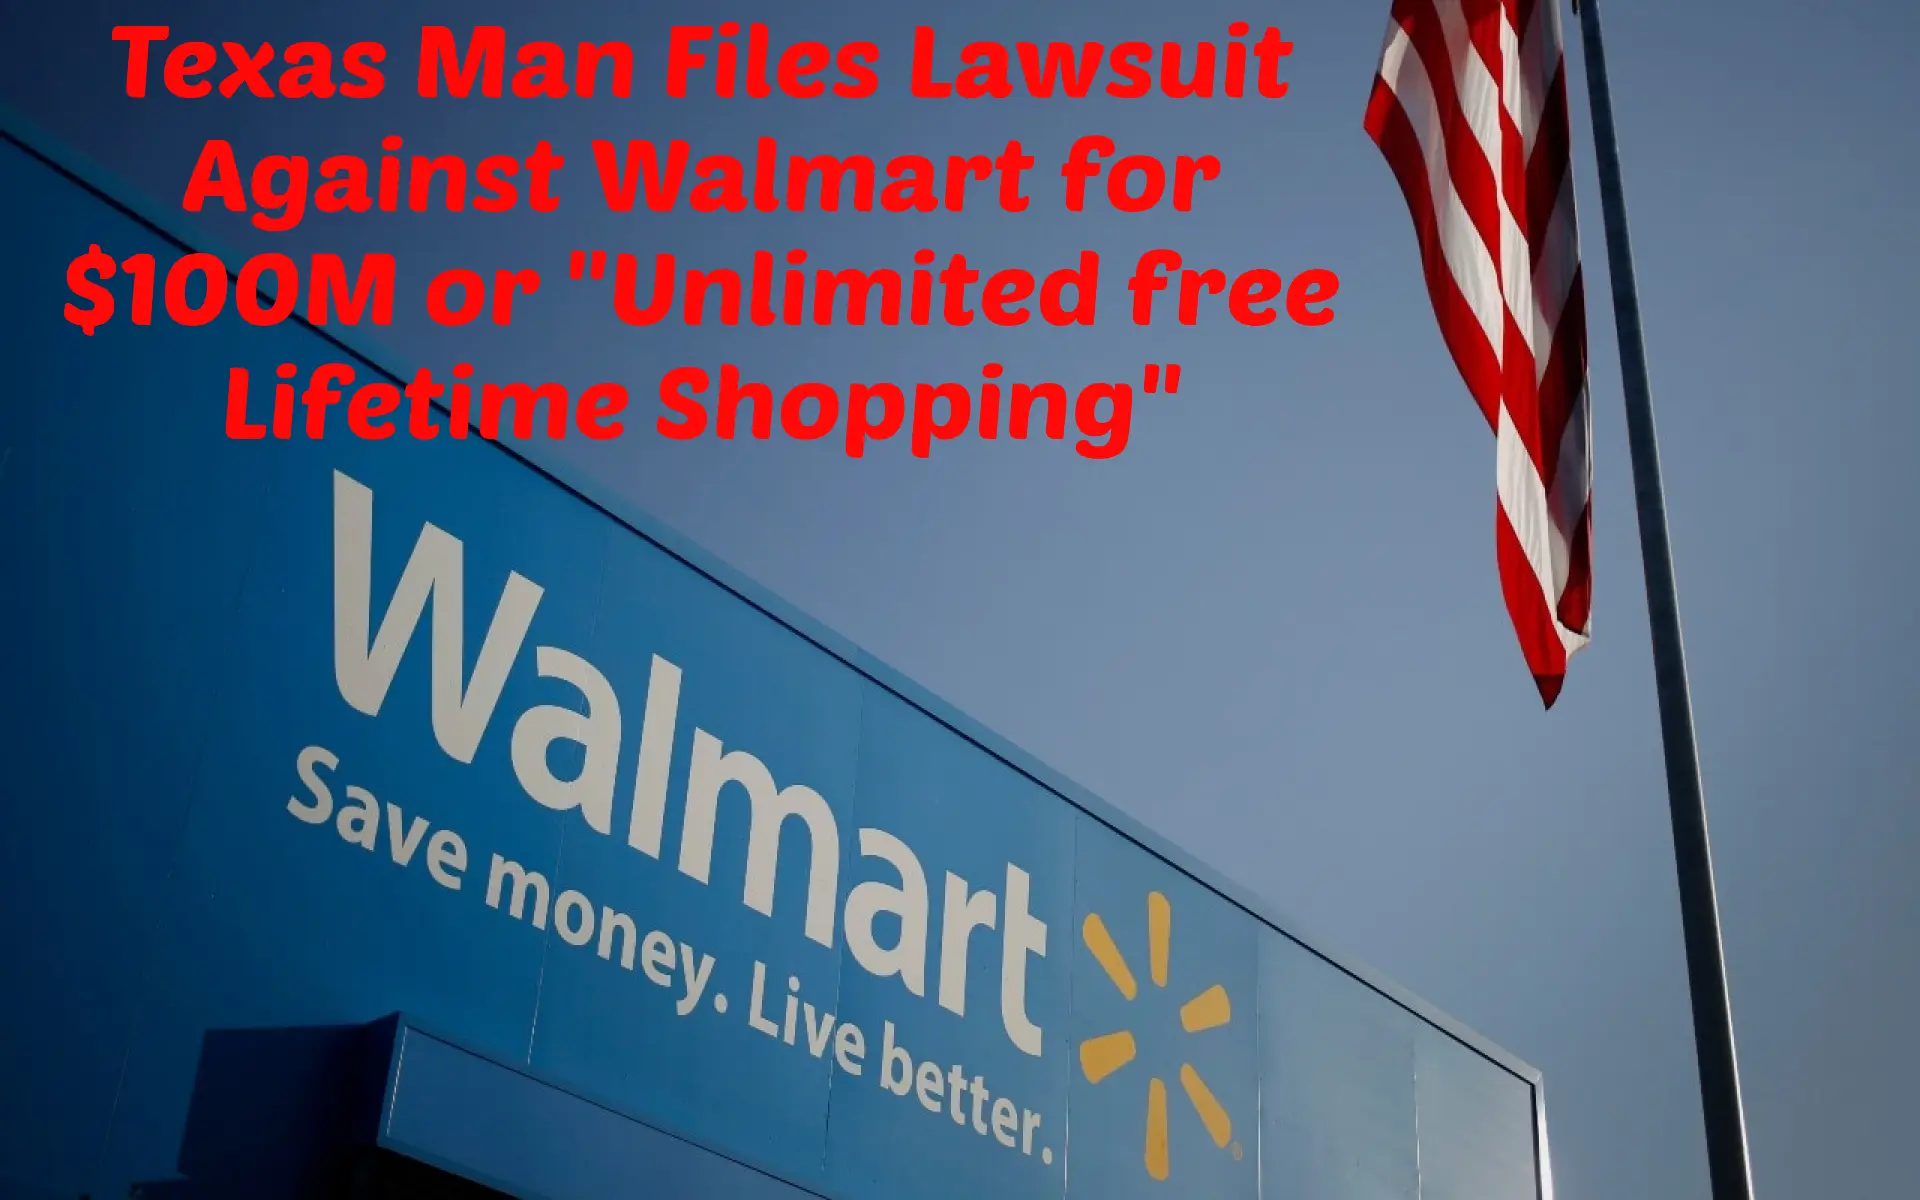 Man Files Lawsuit Against Walmart for $100M or “Unlimited free Lifetime Shopping”